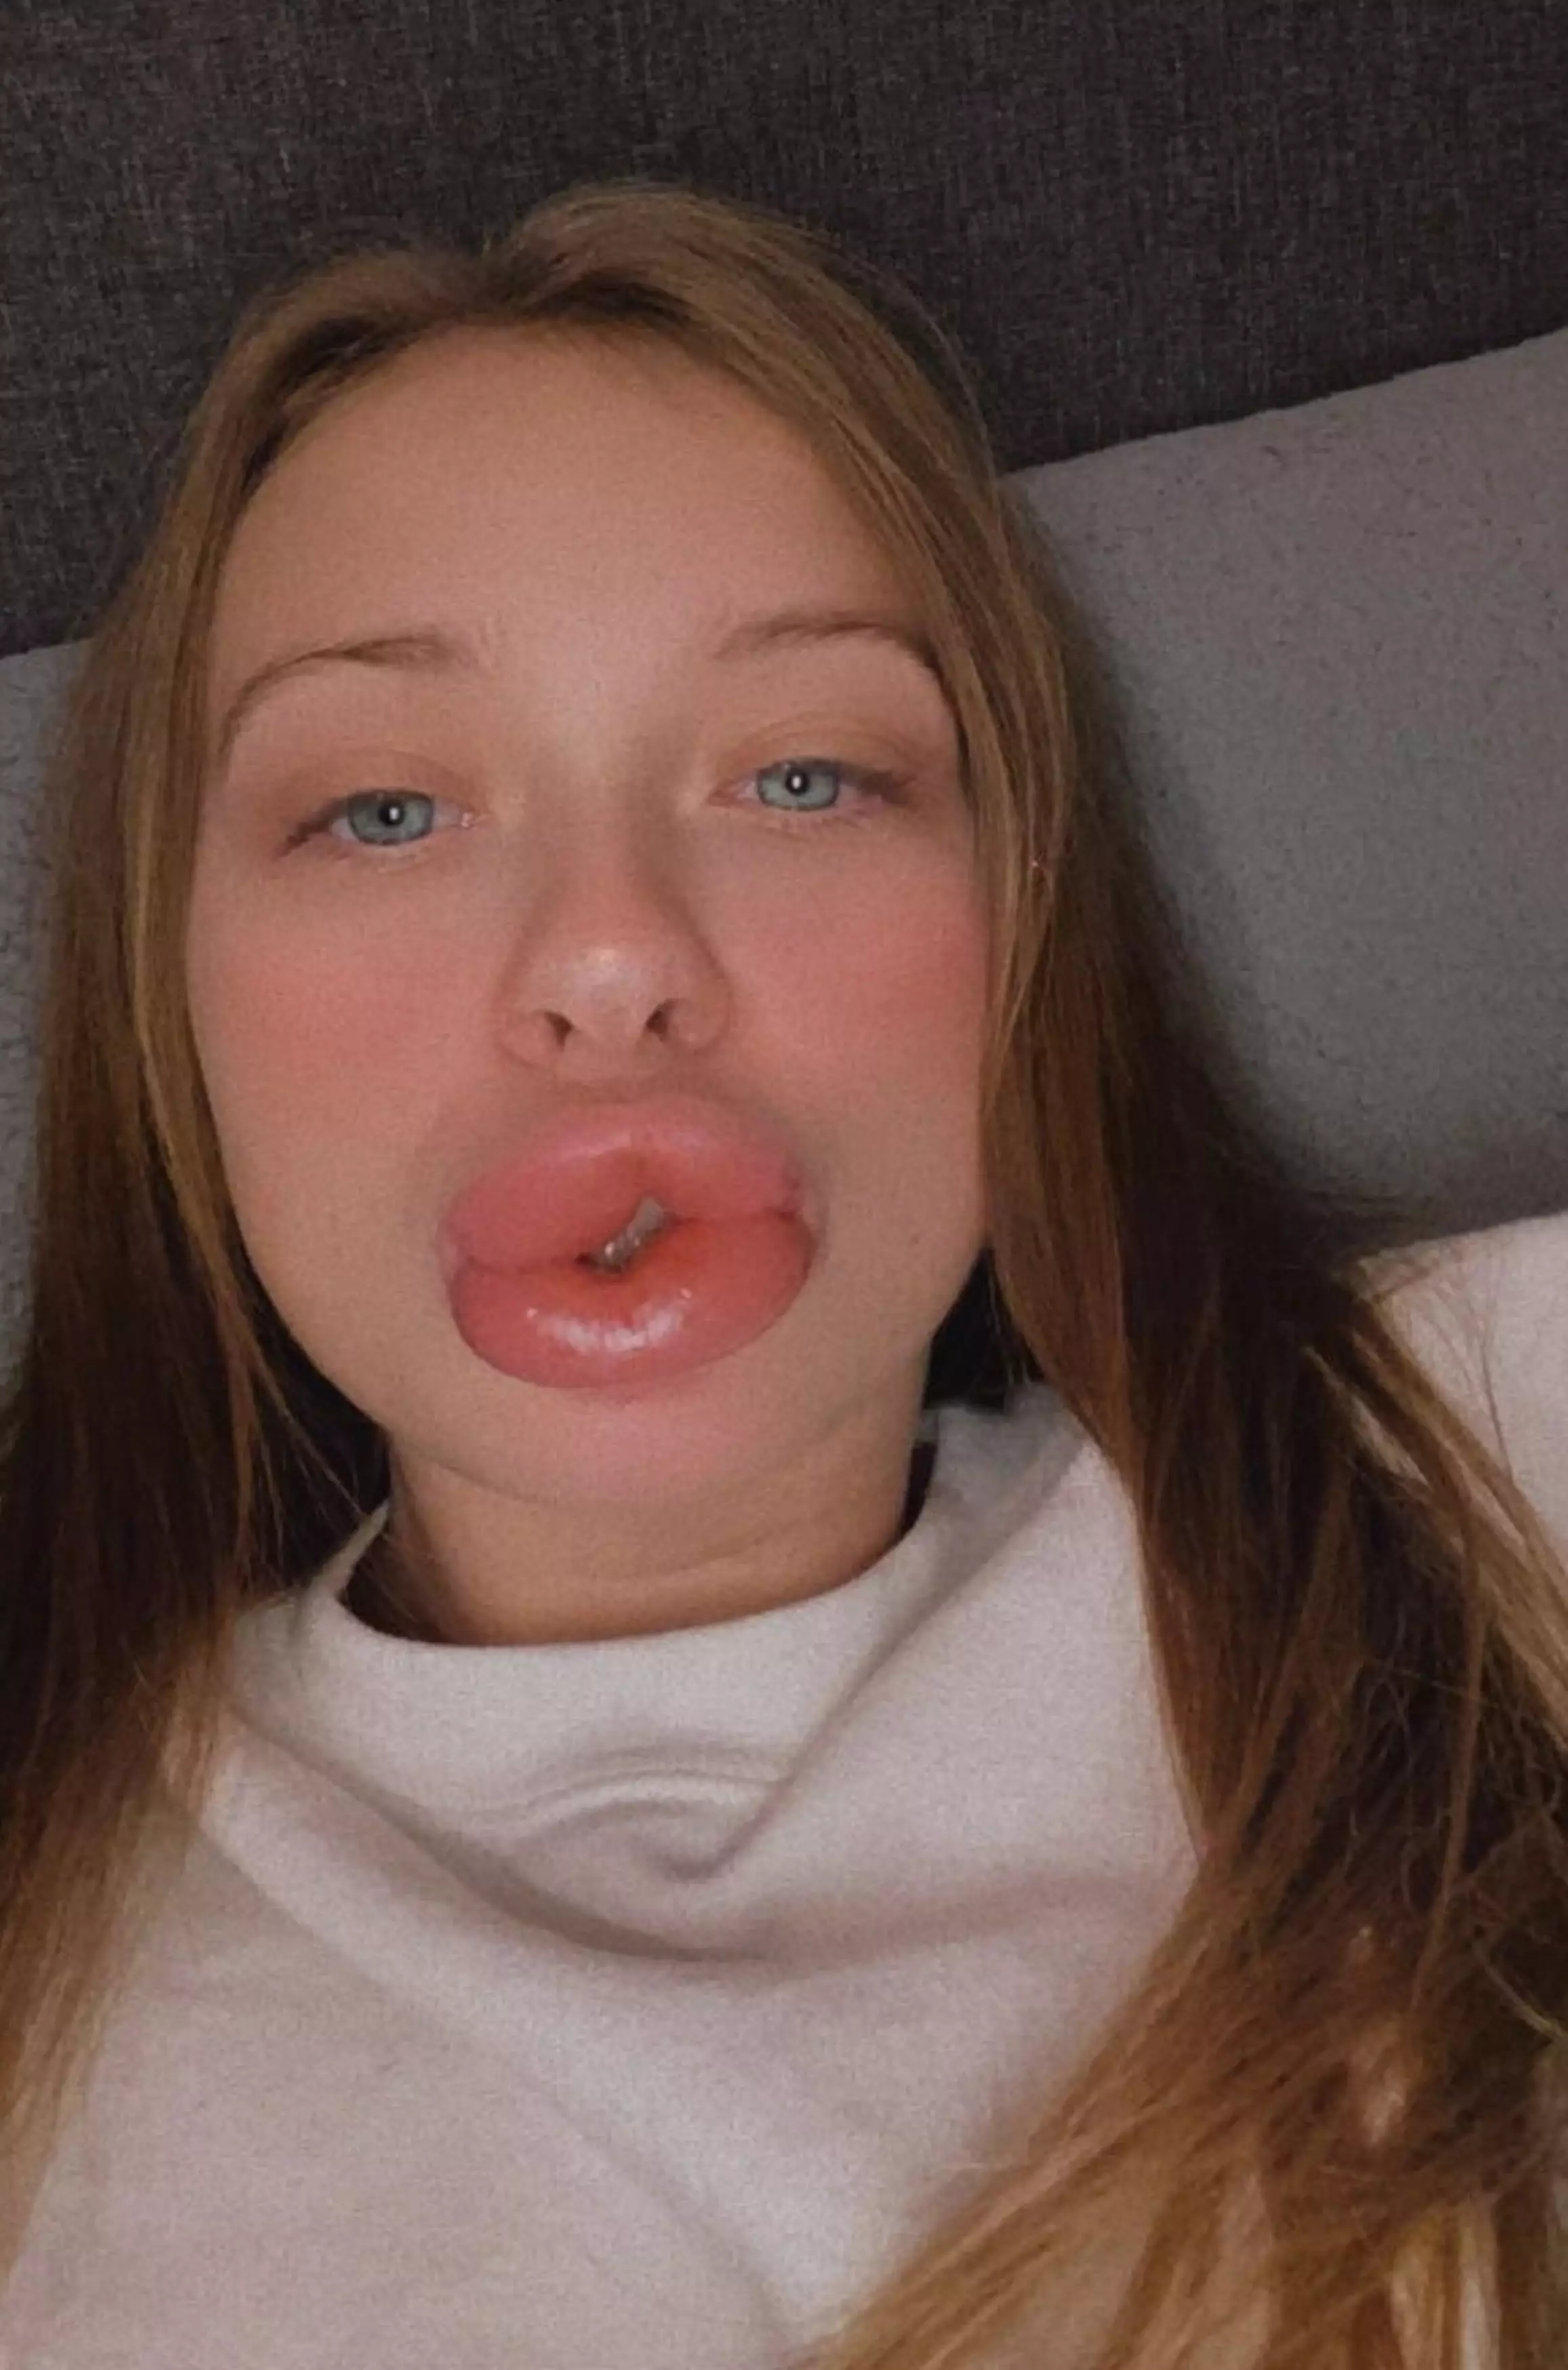 The 25-year-old wanted to get her 'small' lips filled to boost her confidence (